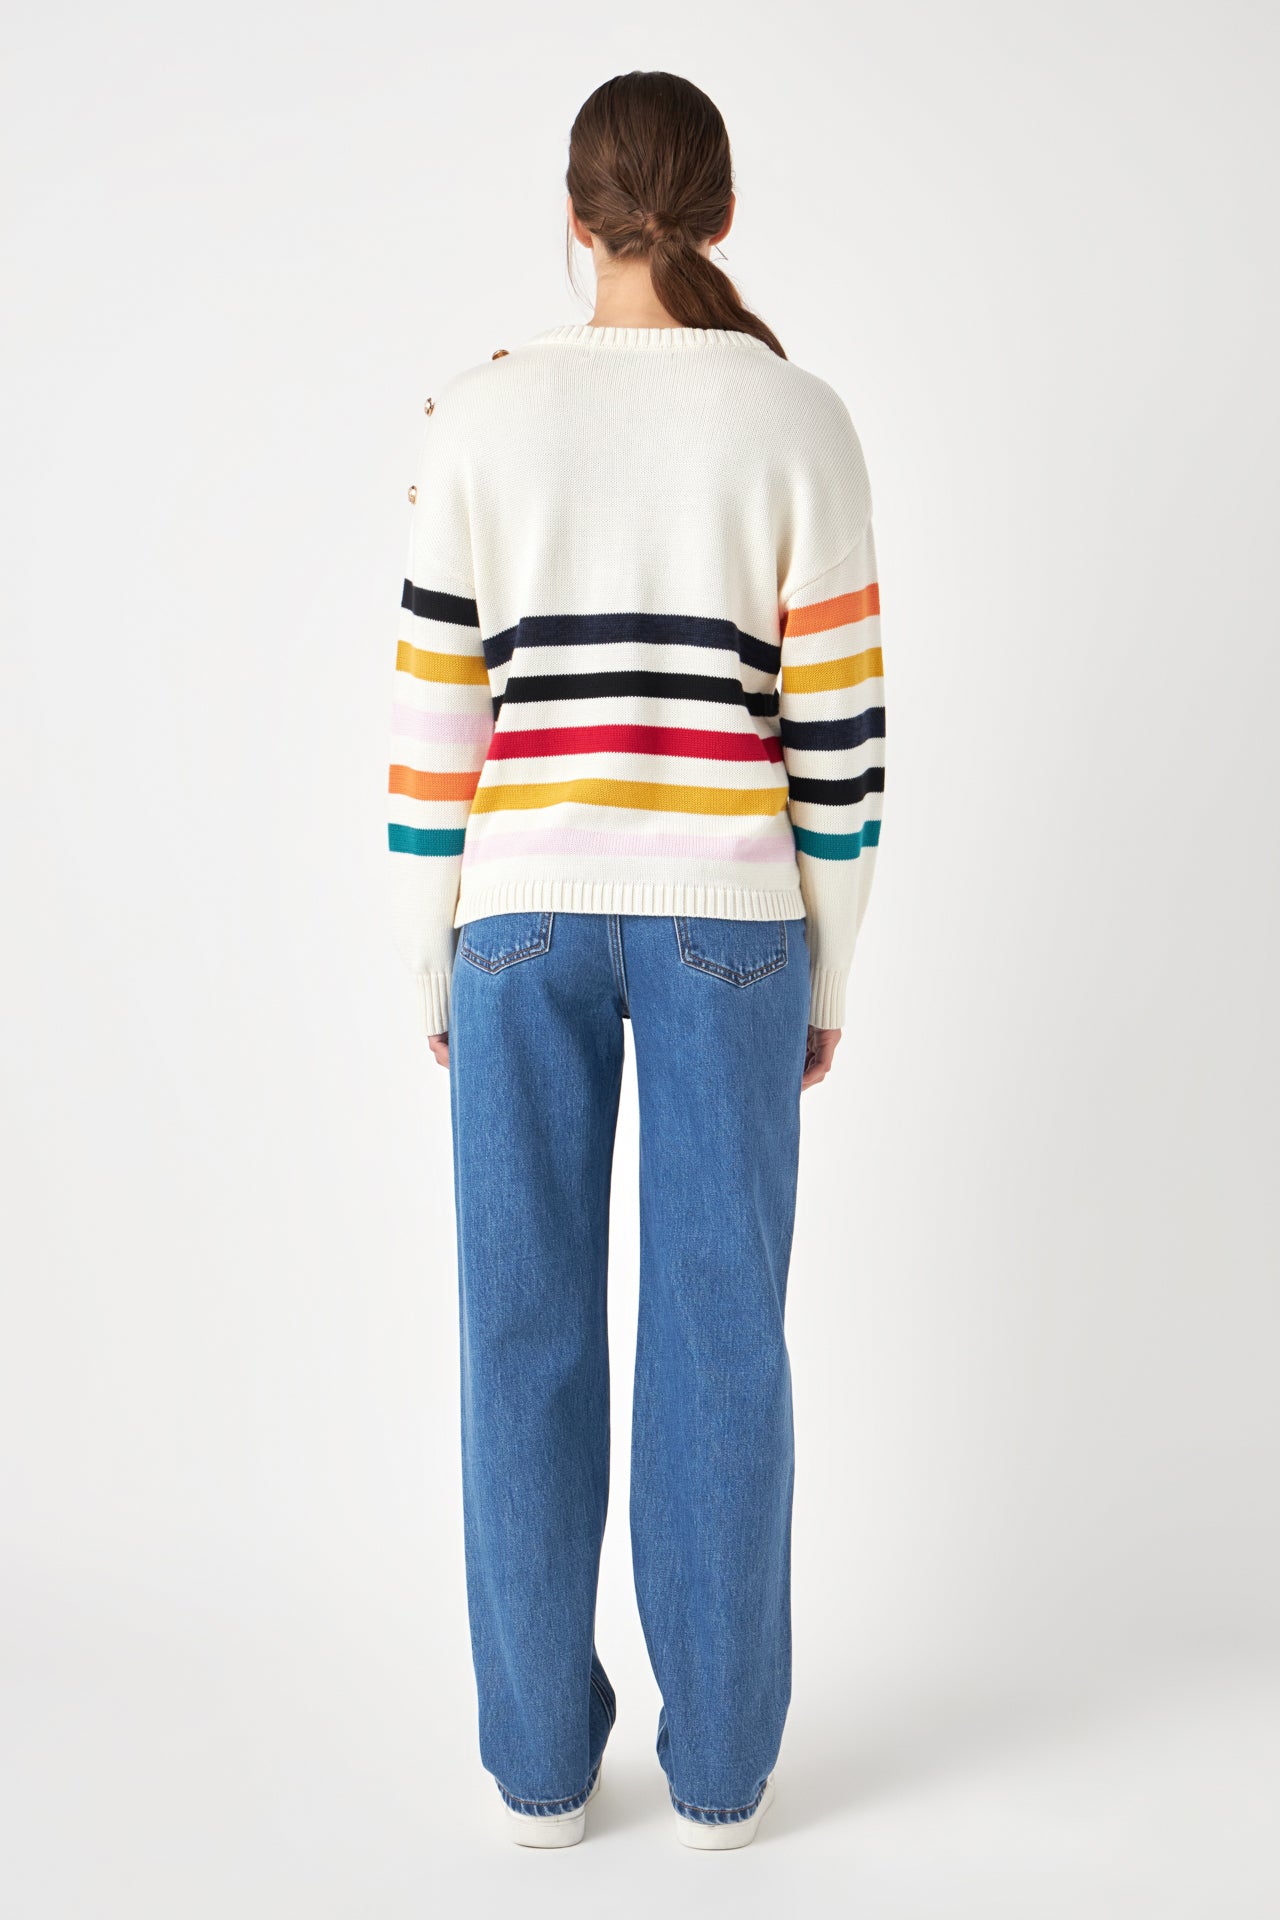 ENGLISH FACTORY - Multicolored Sweater with Button - SWEATERS & KNITS available at Objectrare